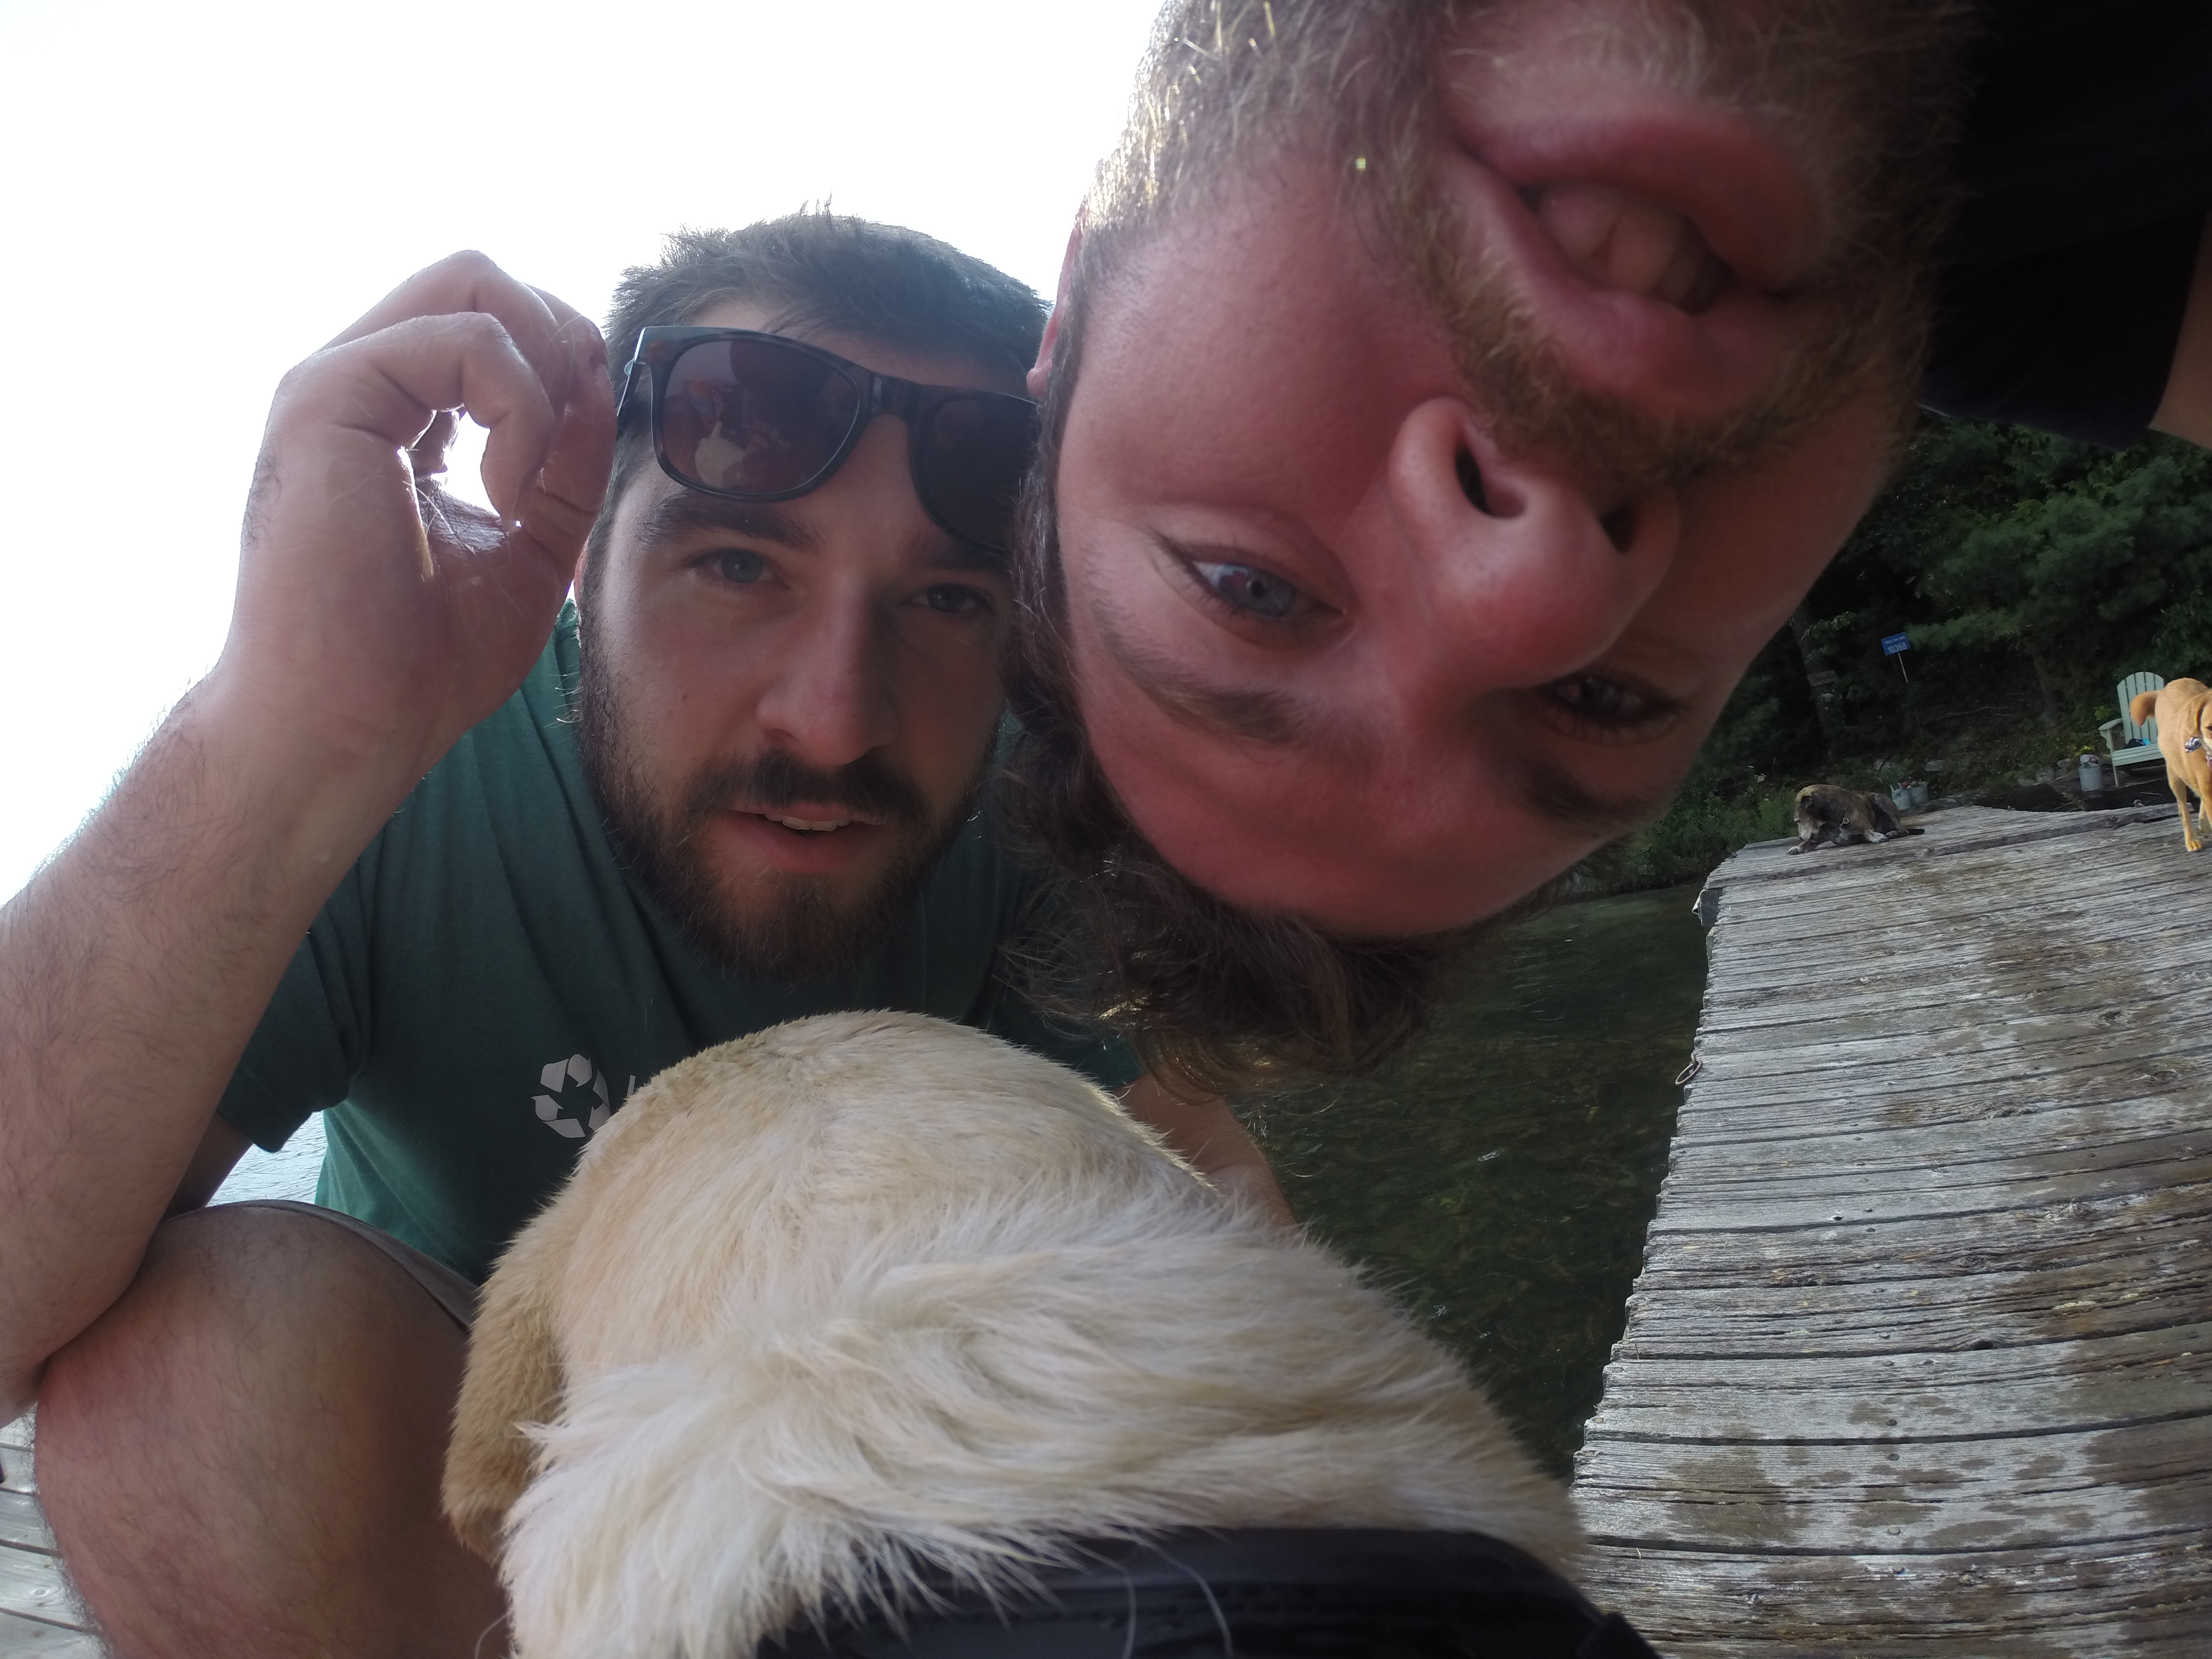 A very flattering still image of me and my brother captured via the Fetch-mounted GoPro.